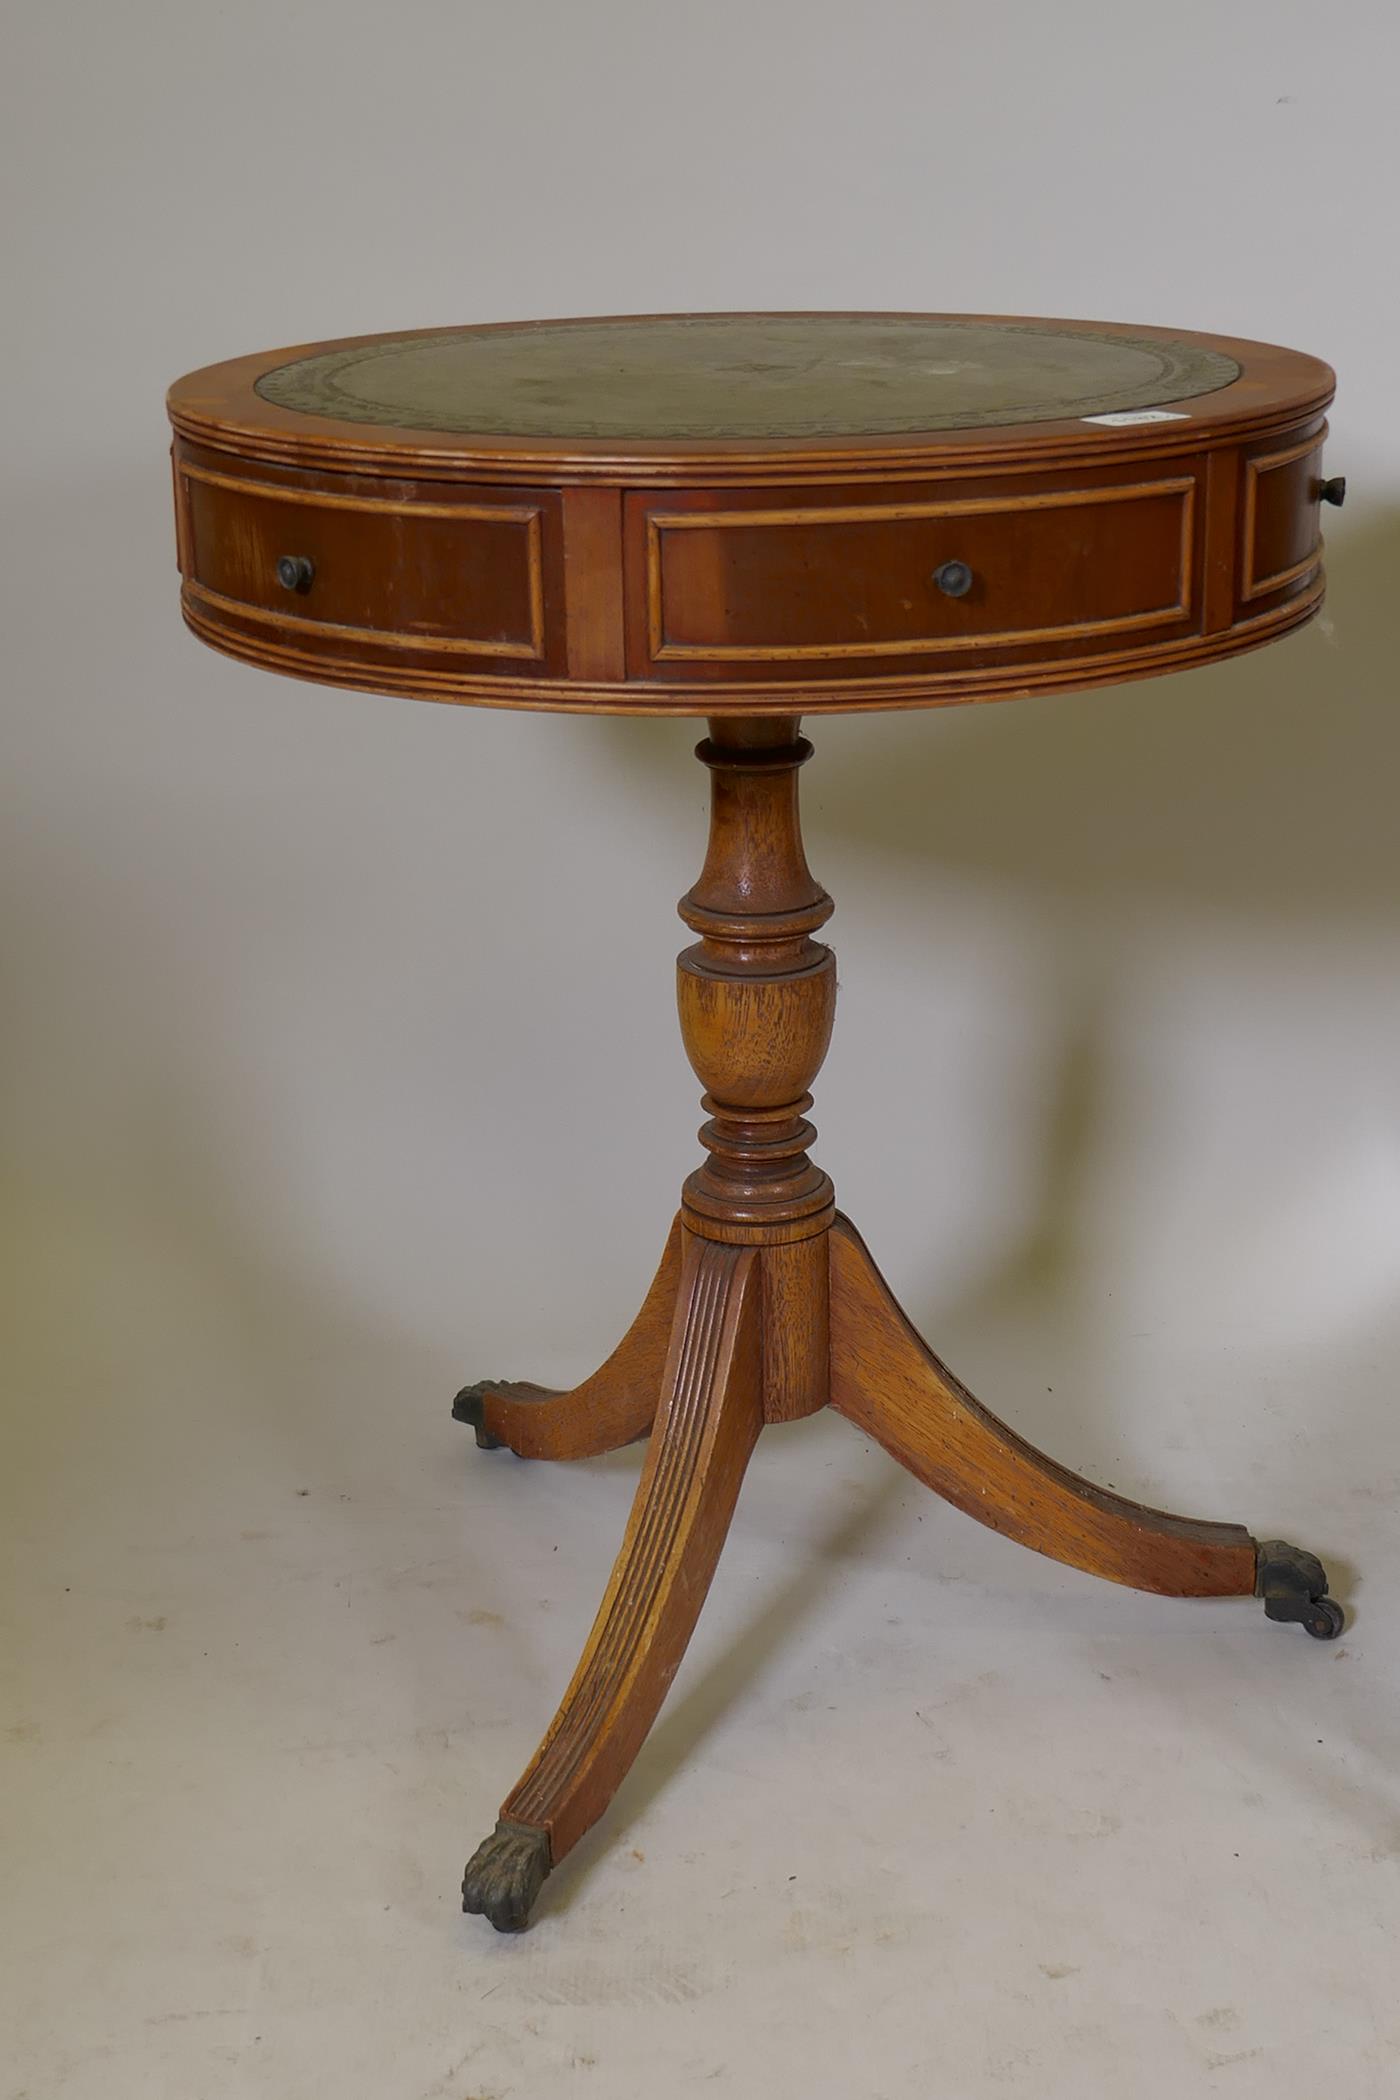 A small yew wood drum table with inset leather top, two true and four false drawers, raised on - Image 2 of 4